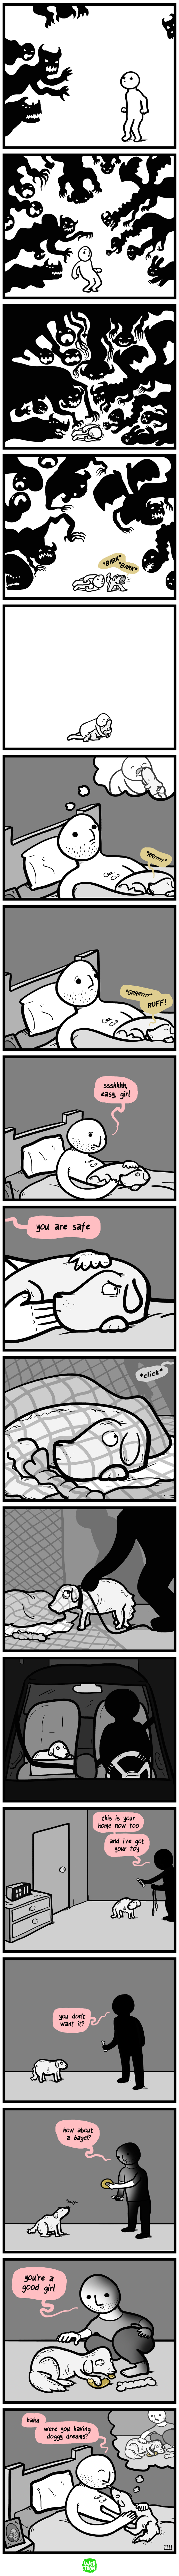 You are safe